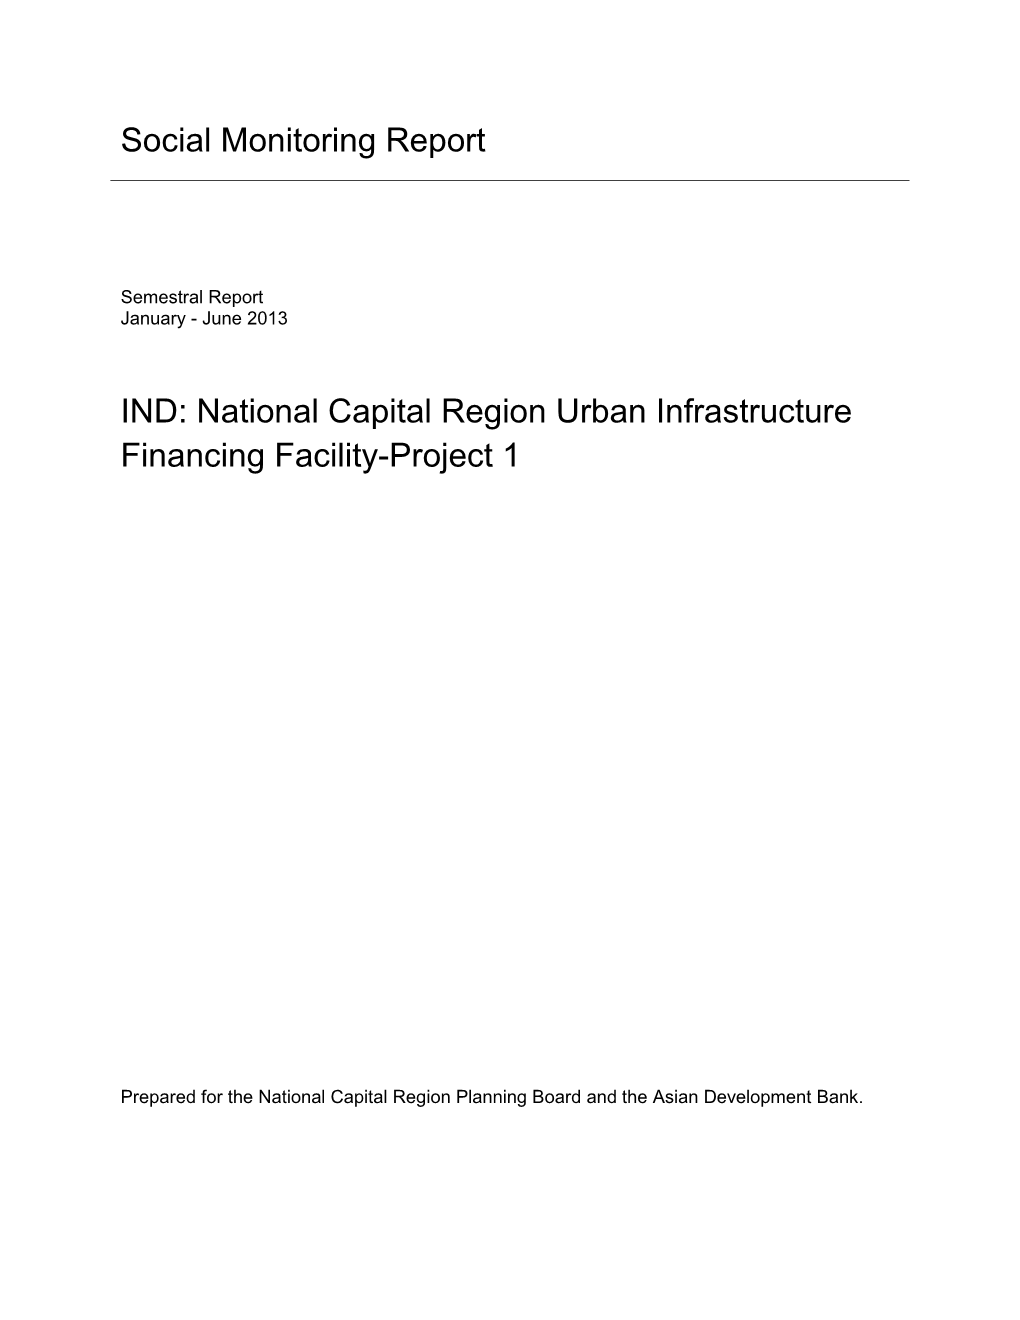 National Capital Region Urban Infrastructure Financing Facility-Project 1